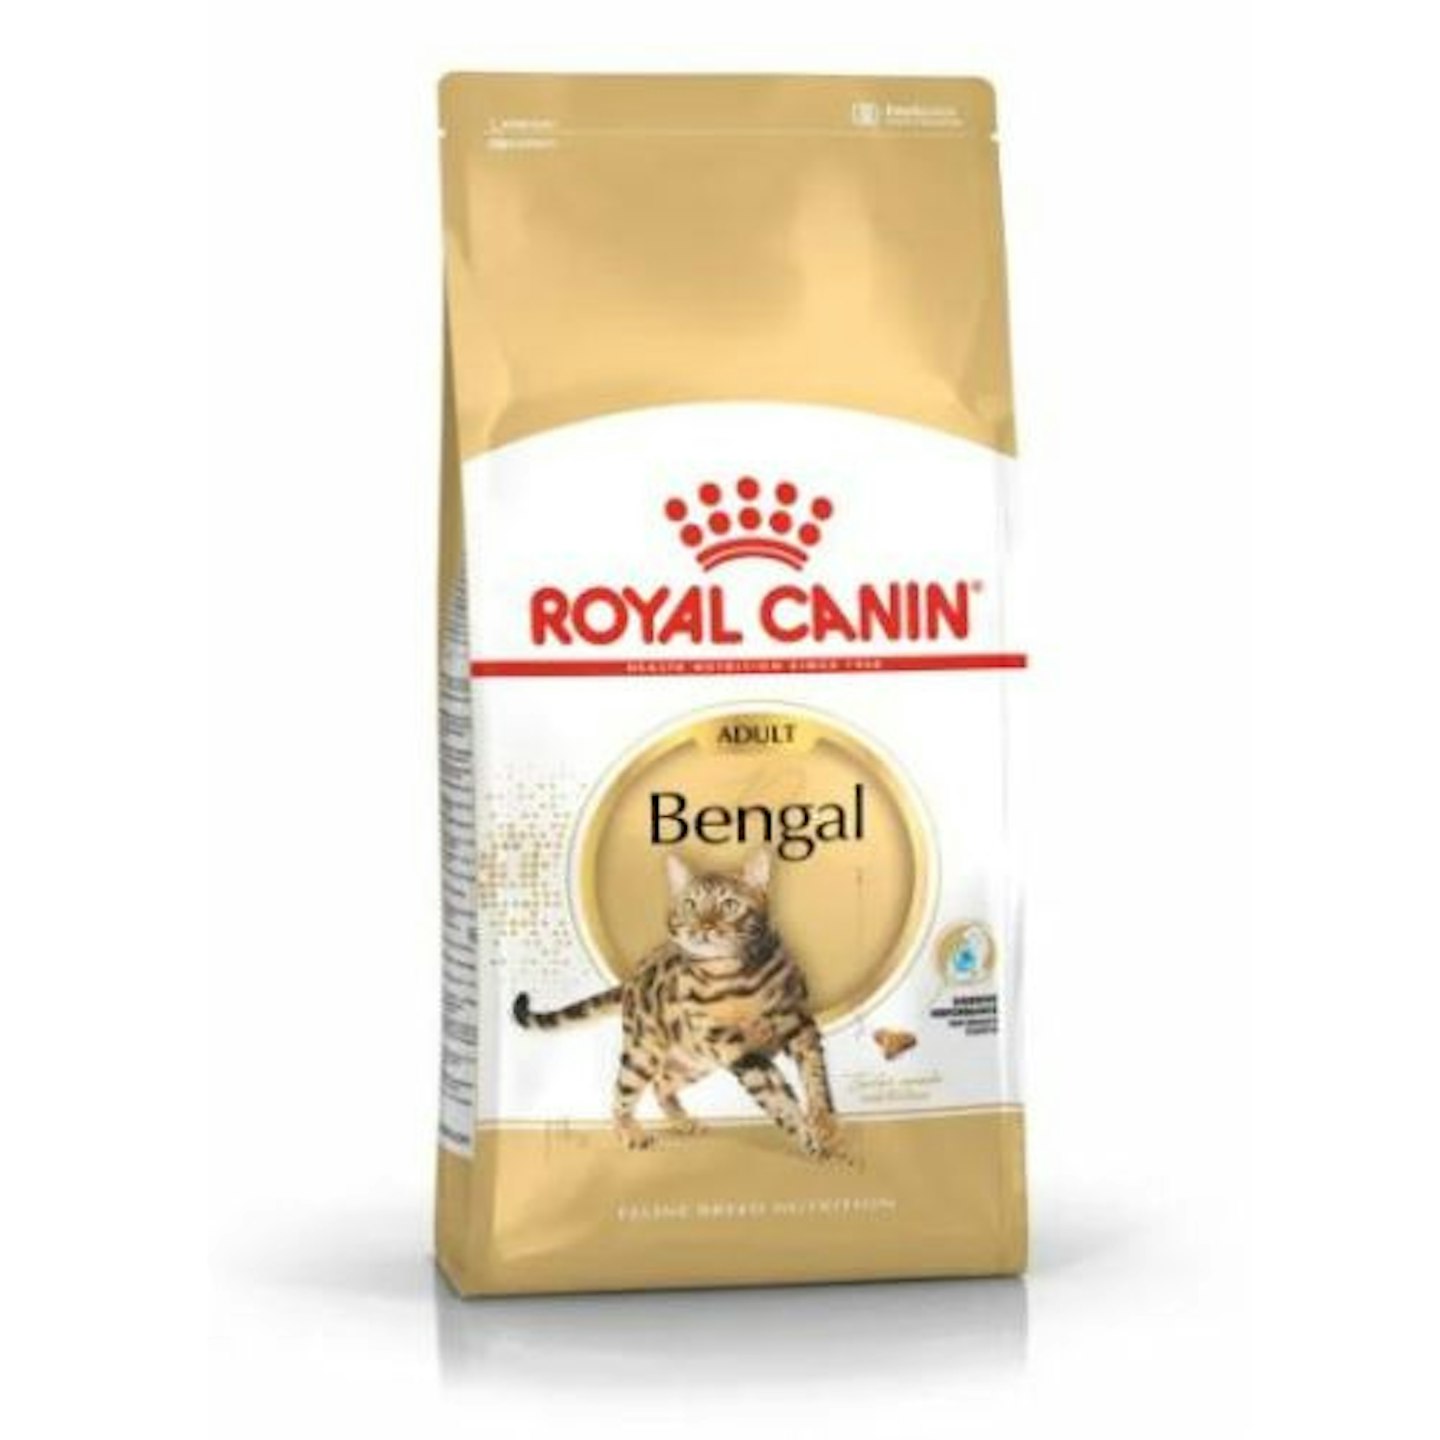 Royal Canin Bengal Adult Cat Dry Food